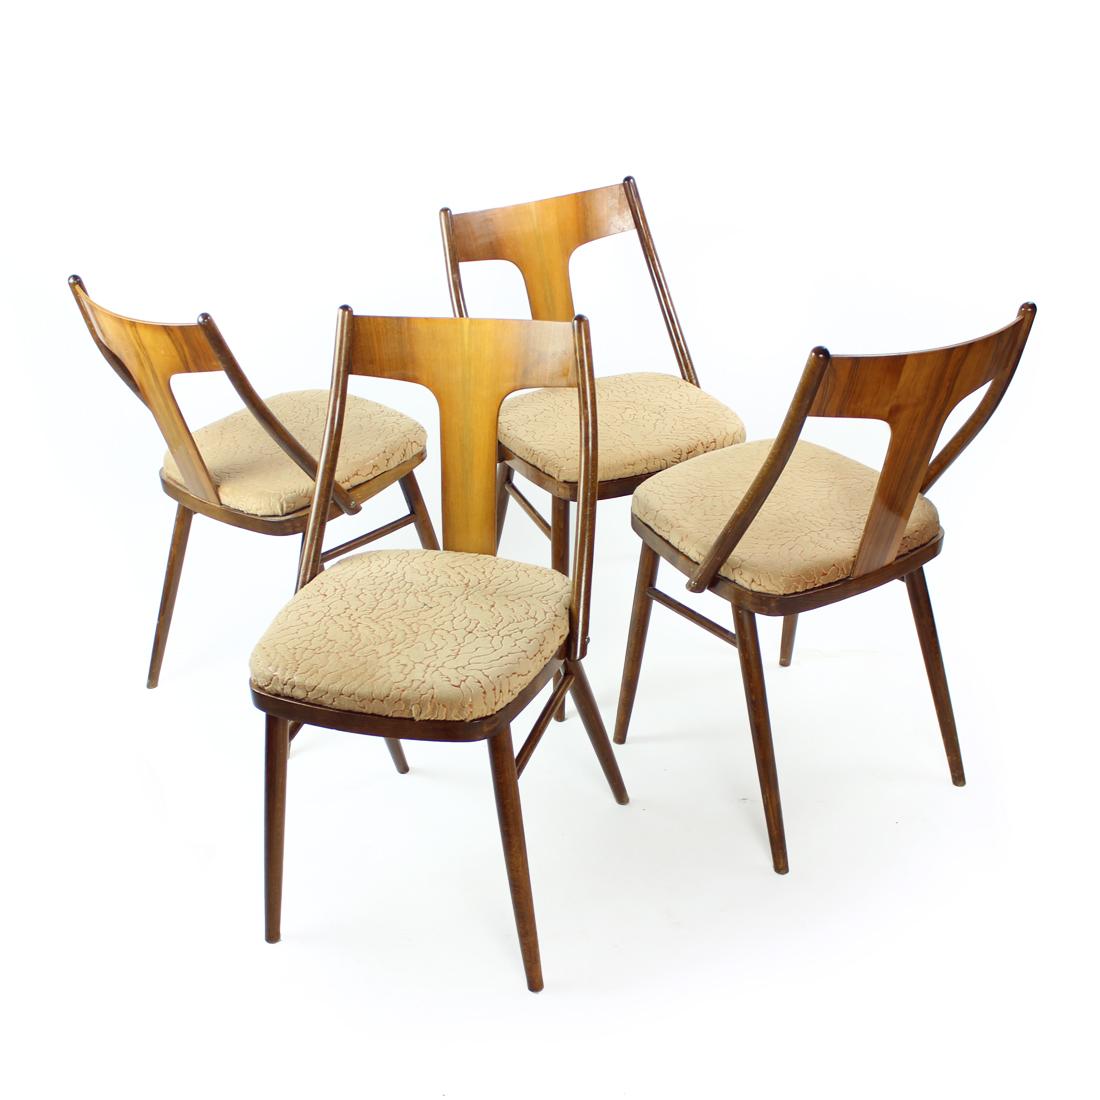 Set of 4 Midcentury Dining Chairs, Czechoslovakia 1960s For Sale 5